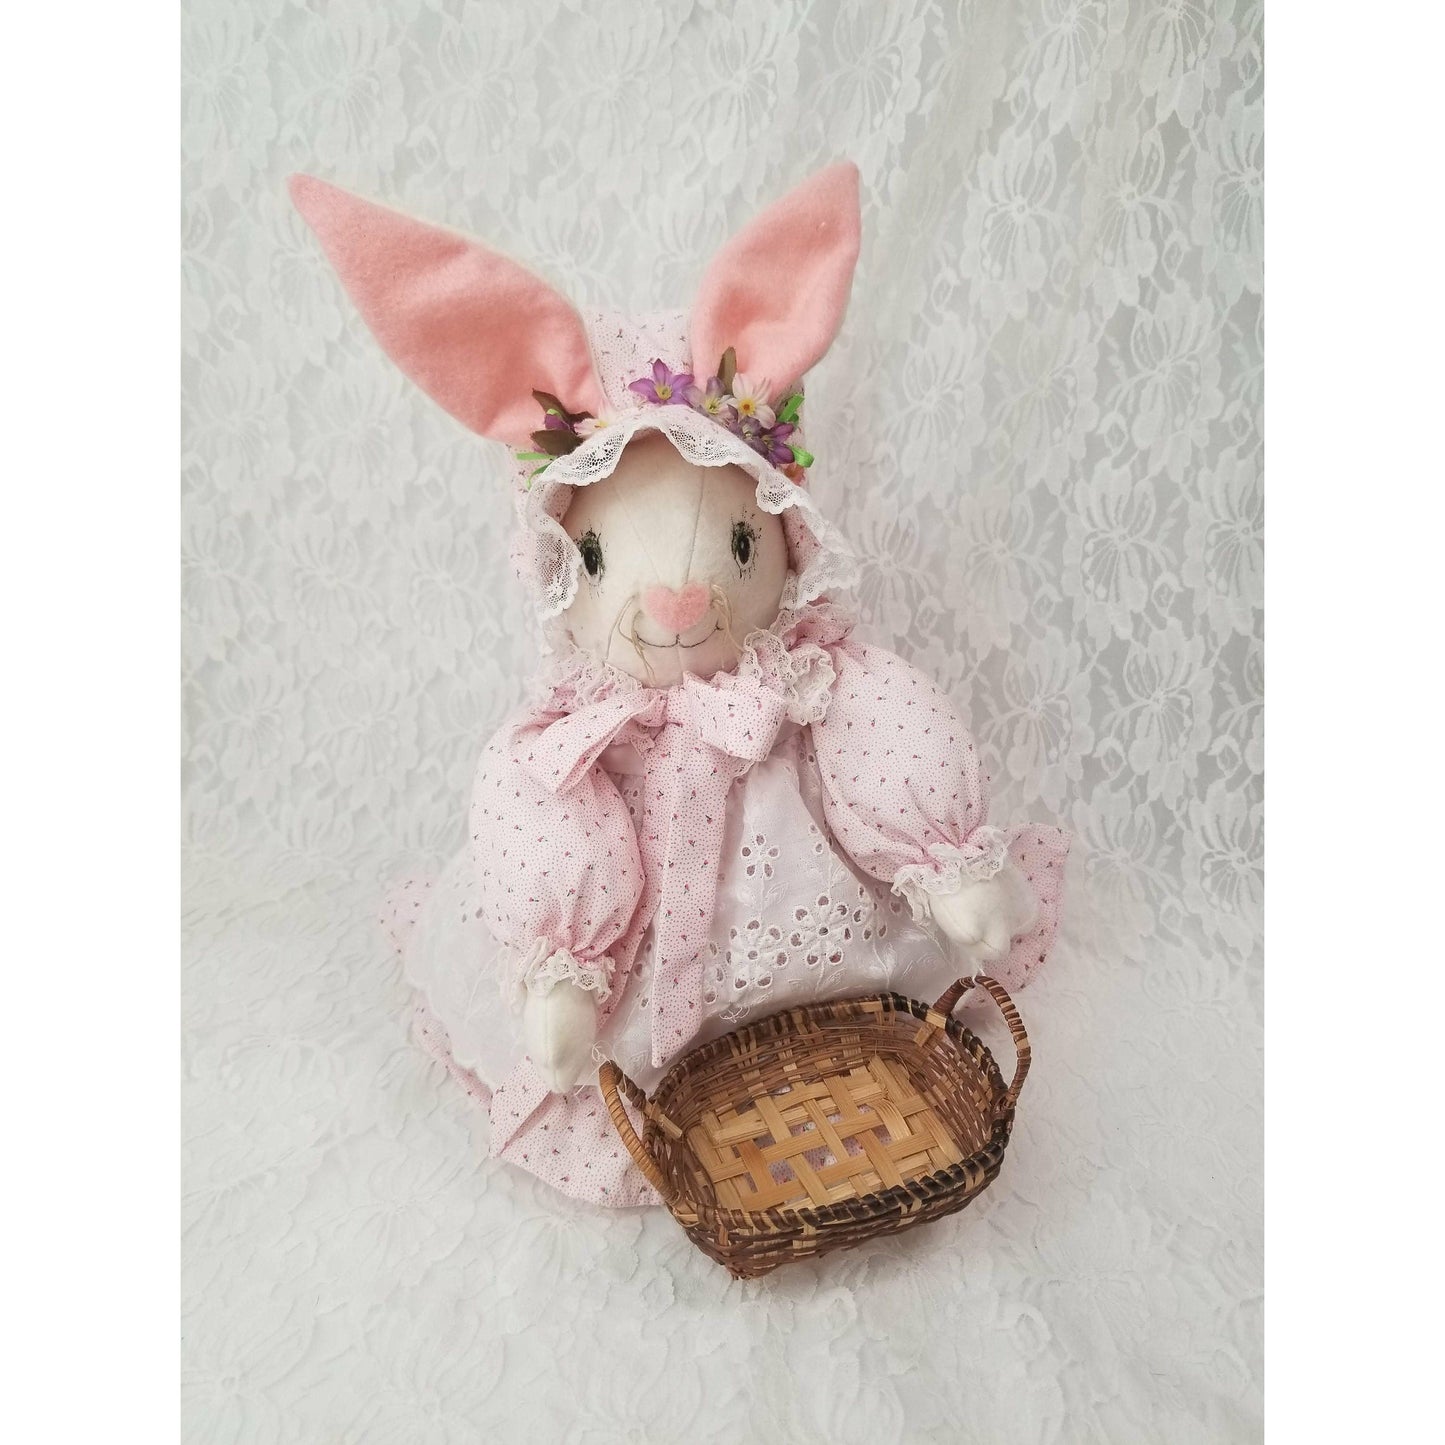 Bunny Rabbit Hare Girl Doll ~ Handmade Vintage 1980s 16" OOAK Cloth ~ Carrying a Wicker Basket ~ Textile Rag Doll